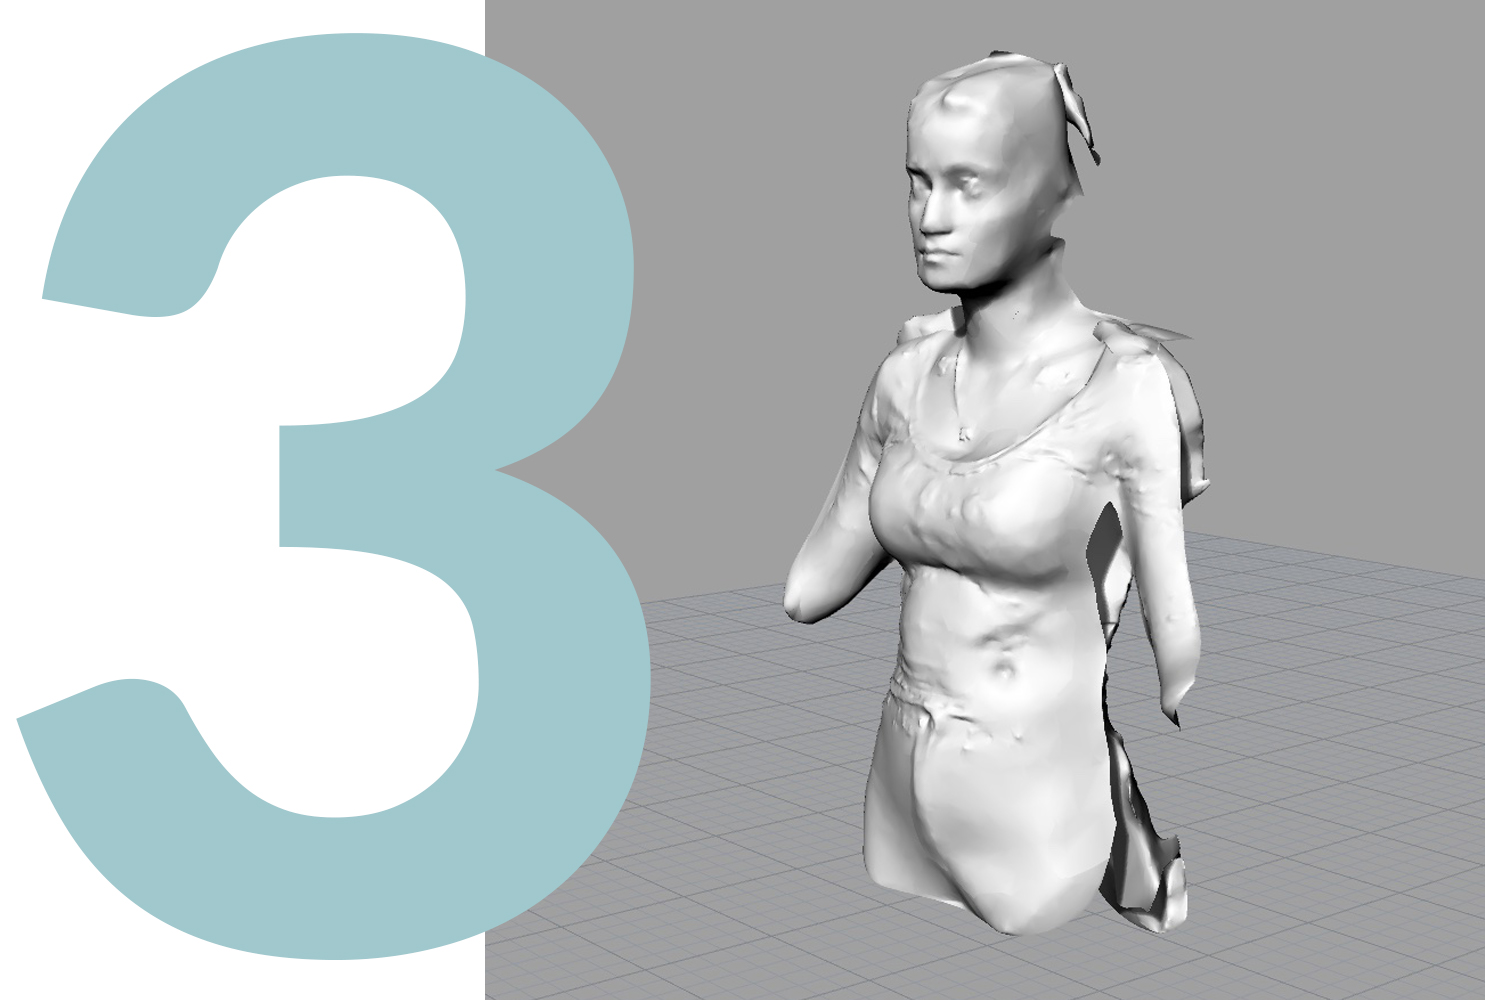 Step 3 - Cleanup and scale the model